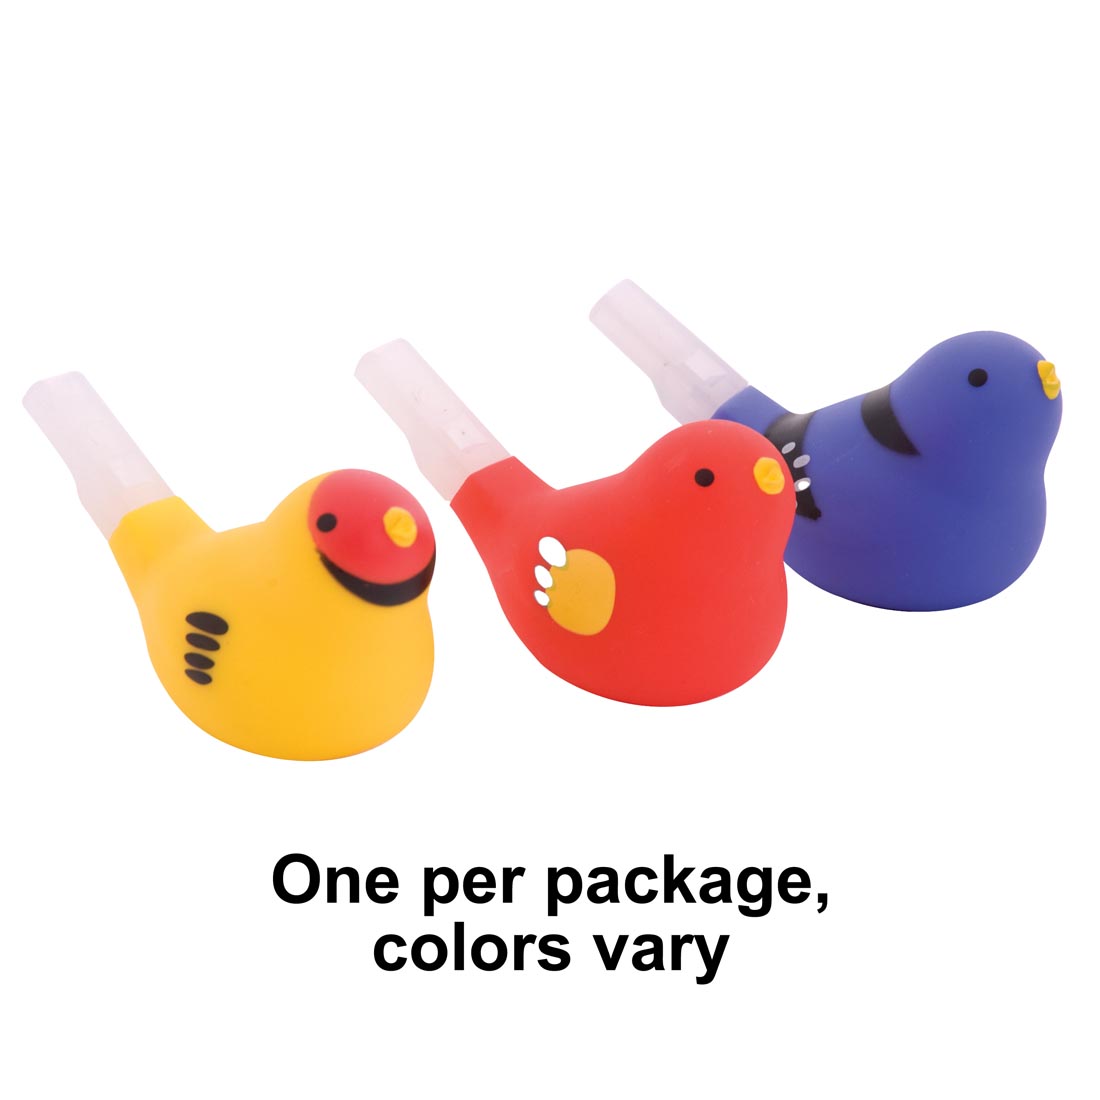 Three Mini Tweets Bird Whistles with the text One per package, colors vary